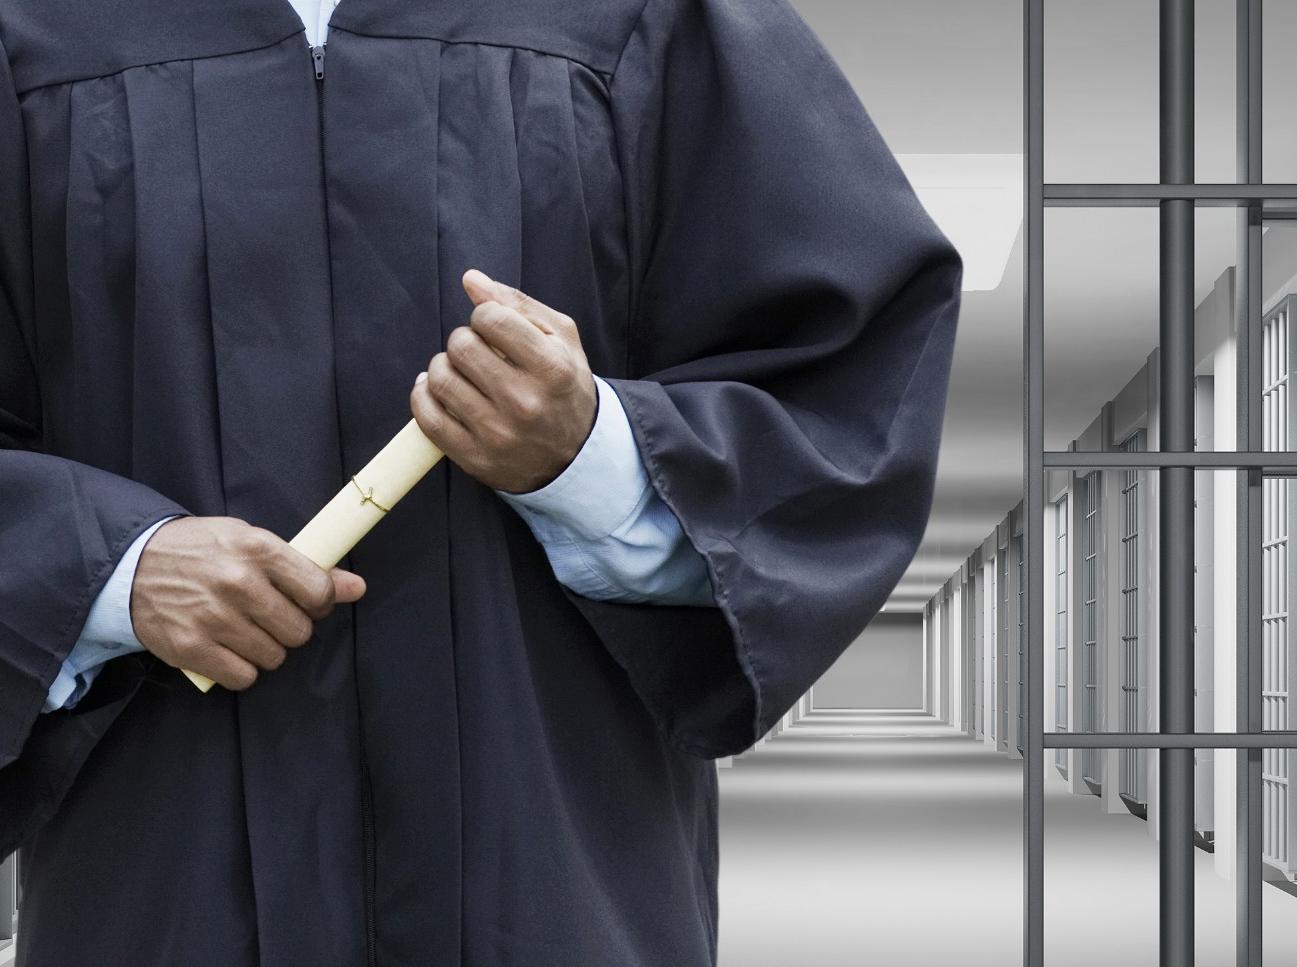 How Effective Is Correctional Education, and Where Do We Go from Here? The Results of a Comprehensive Evaluation | RAND